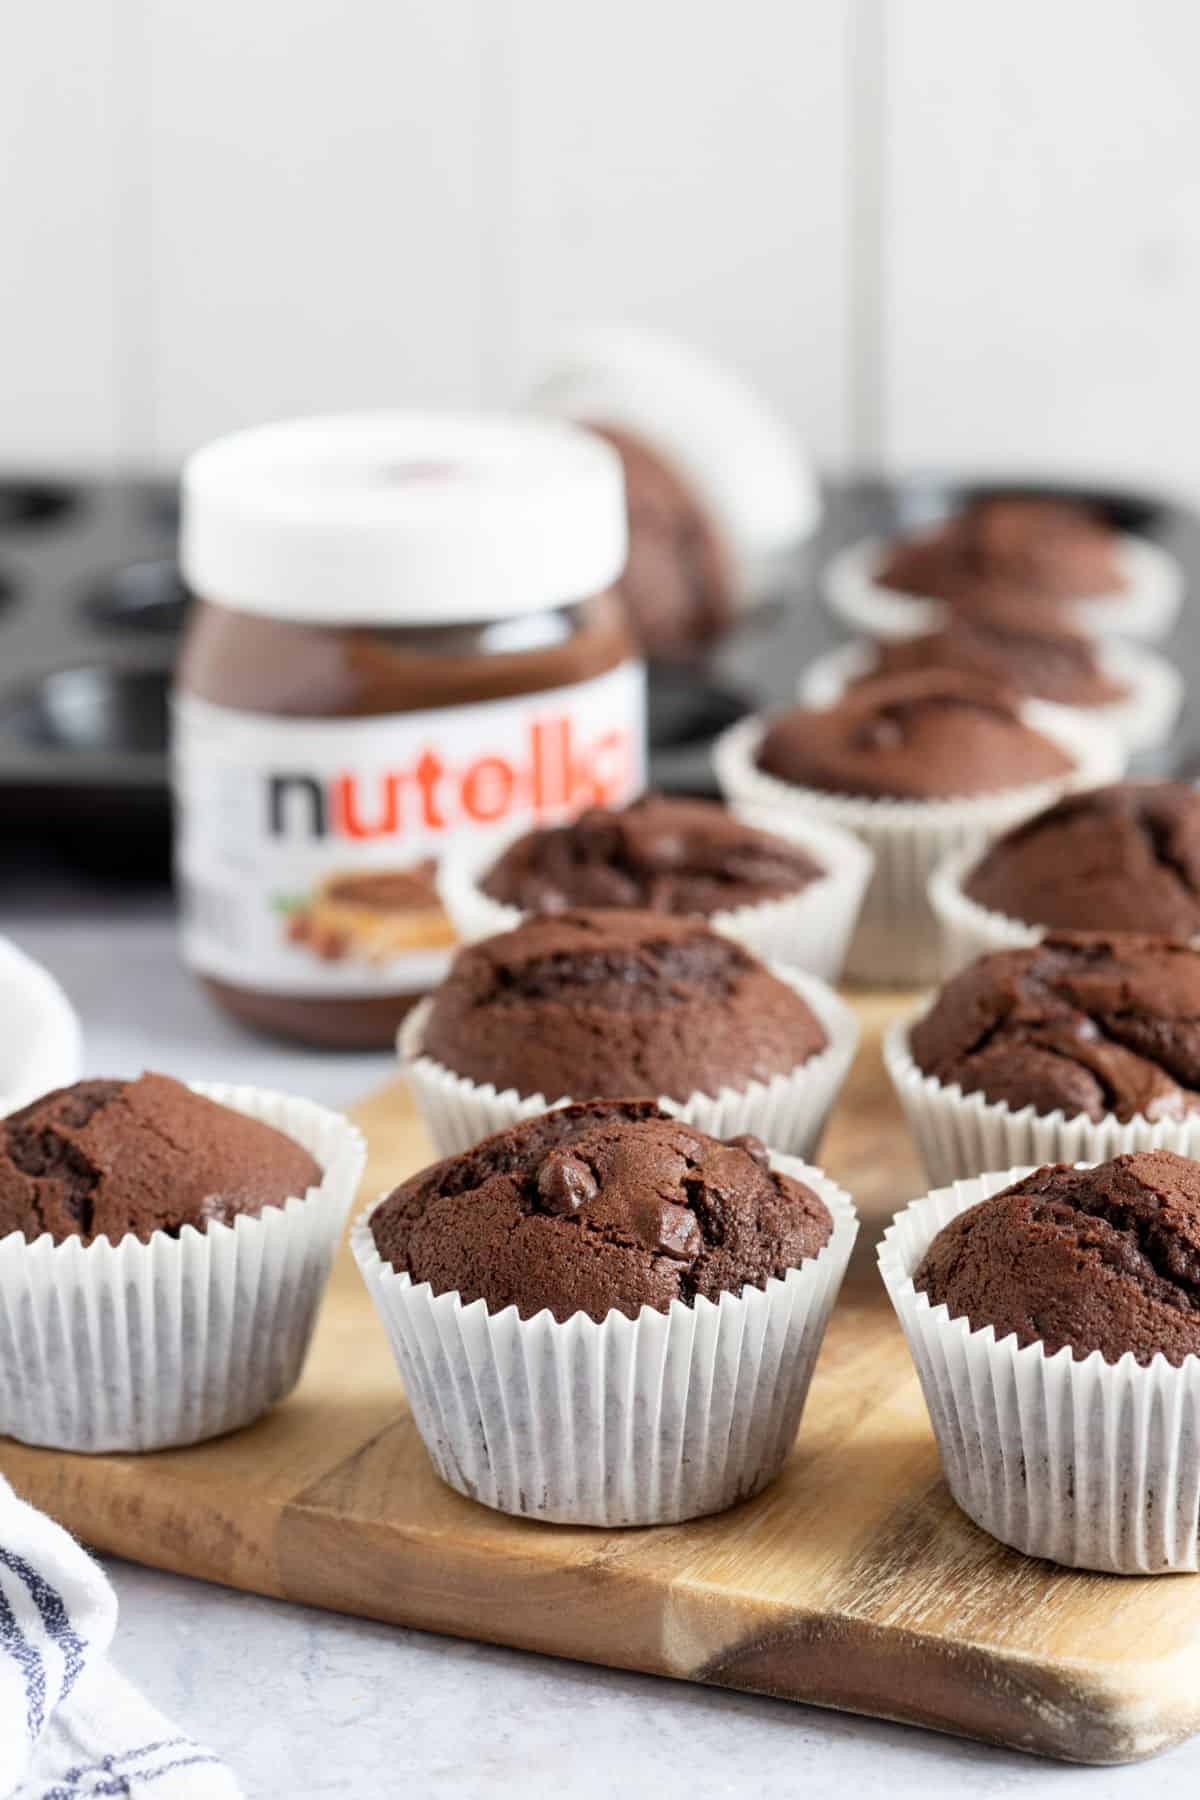 Nutella muffins on a wooden board.